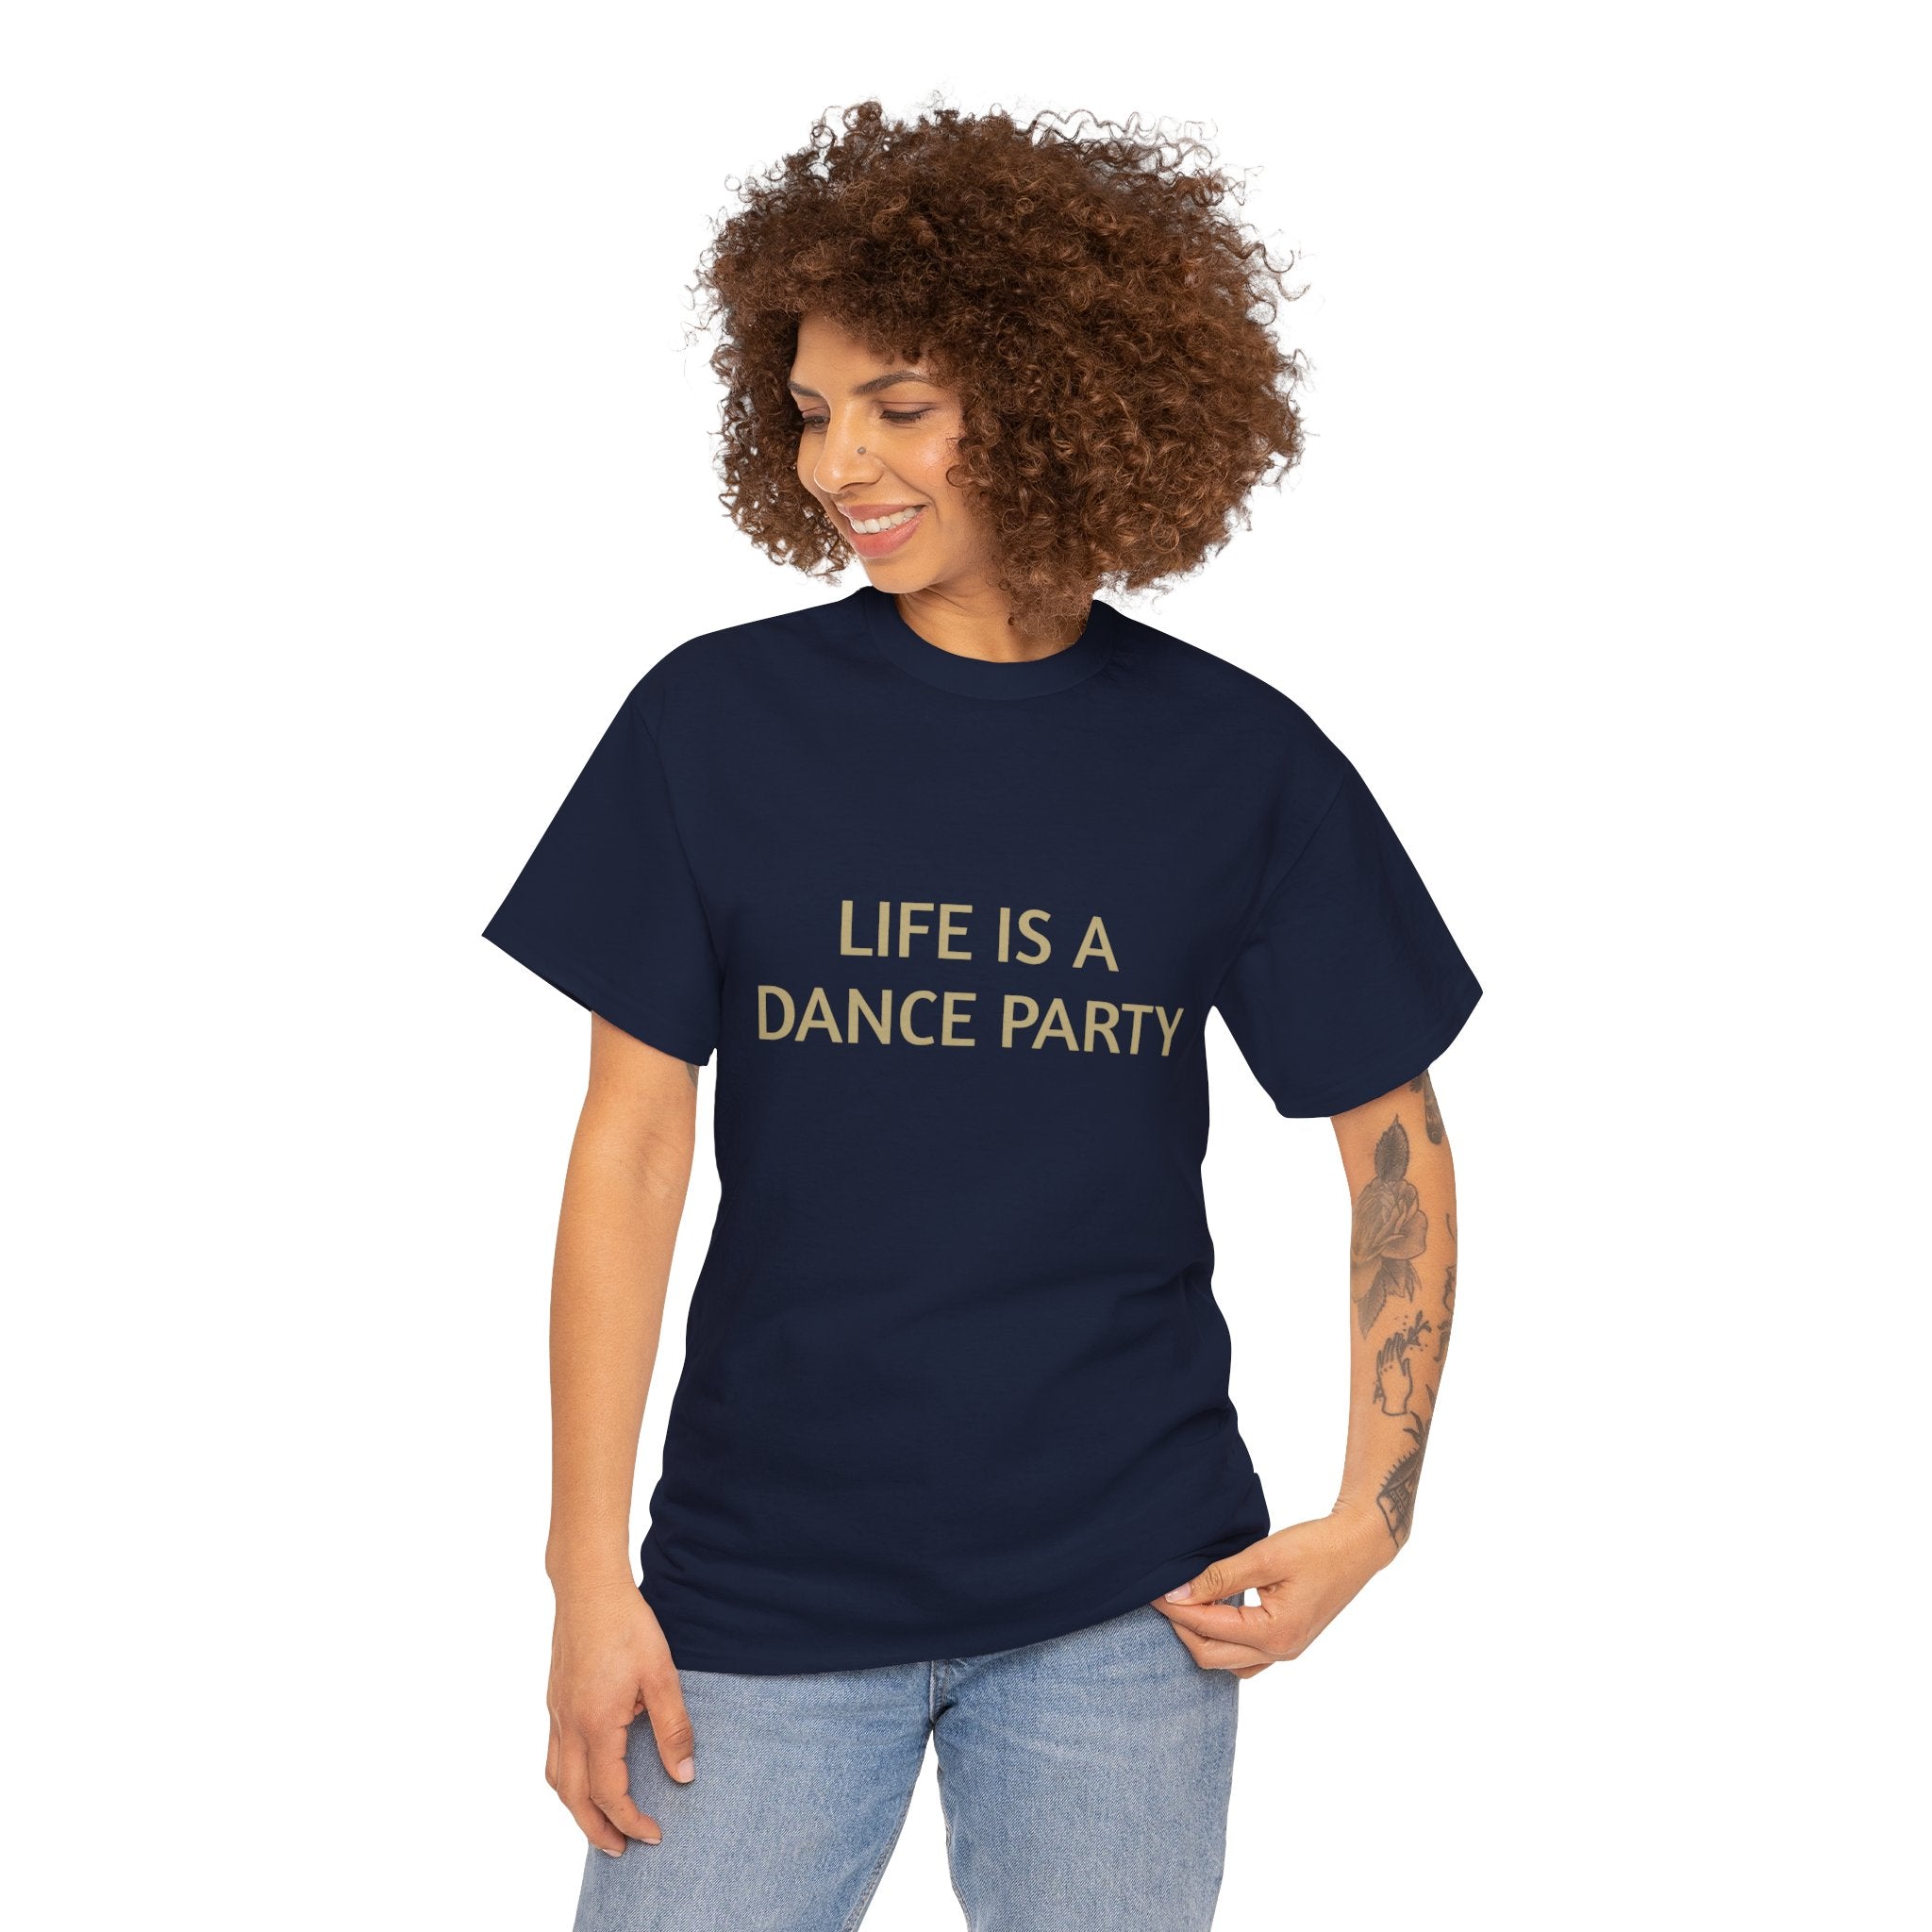 I Love Dance - Get this Life is a dance party tshirt